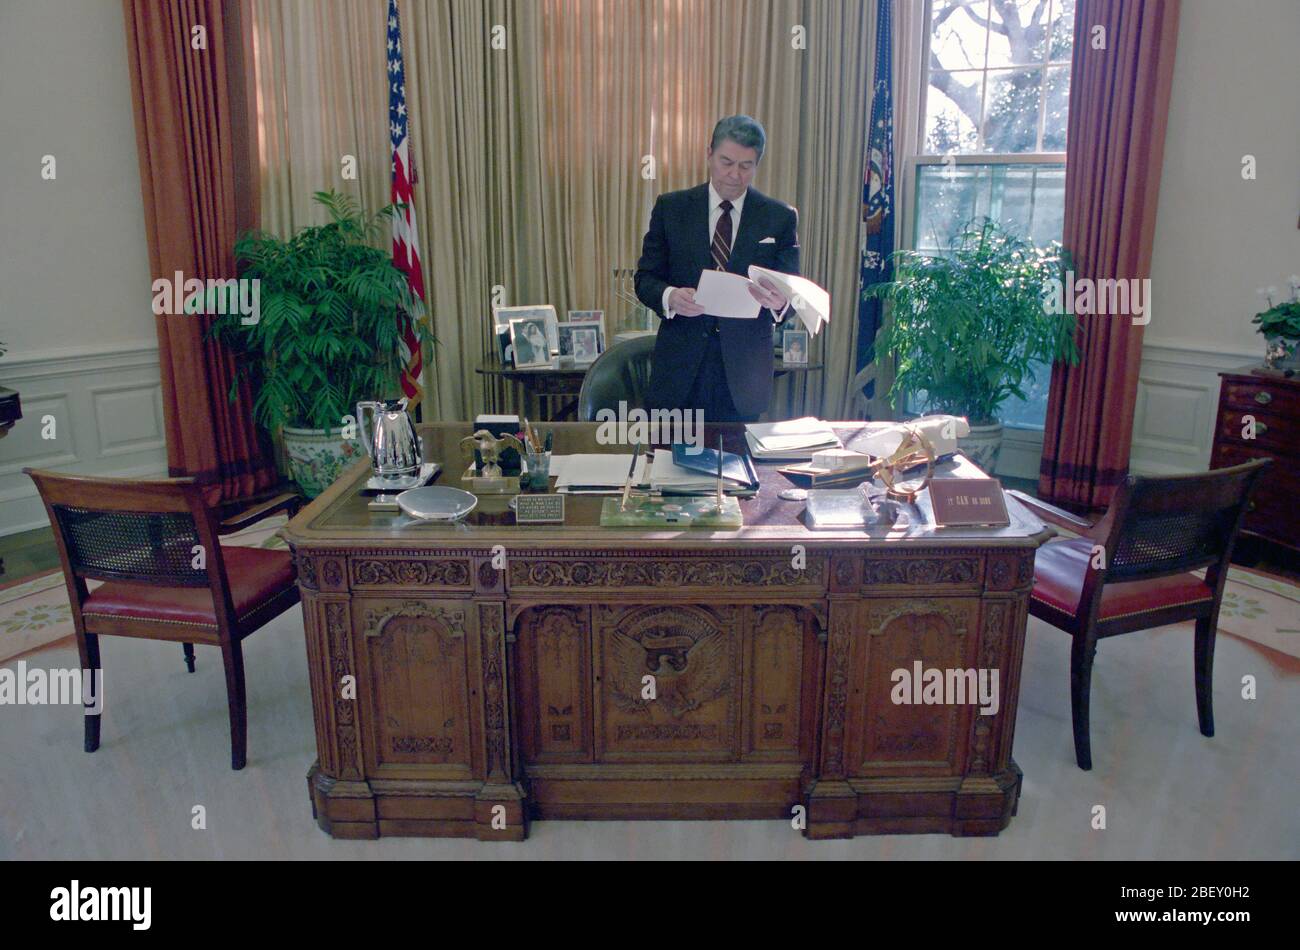 12/6/1988 President Reagan alone in the Oval Office Stock Photo